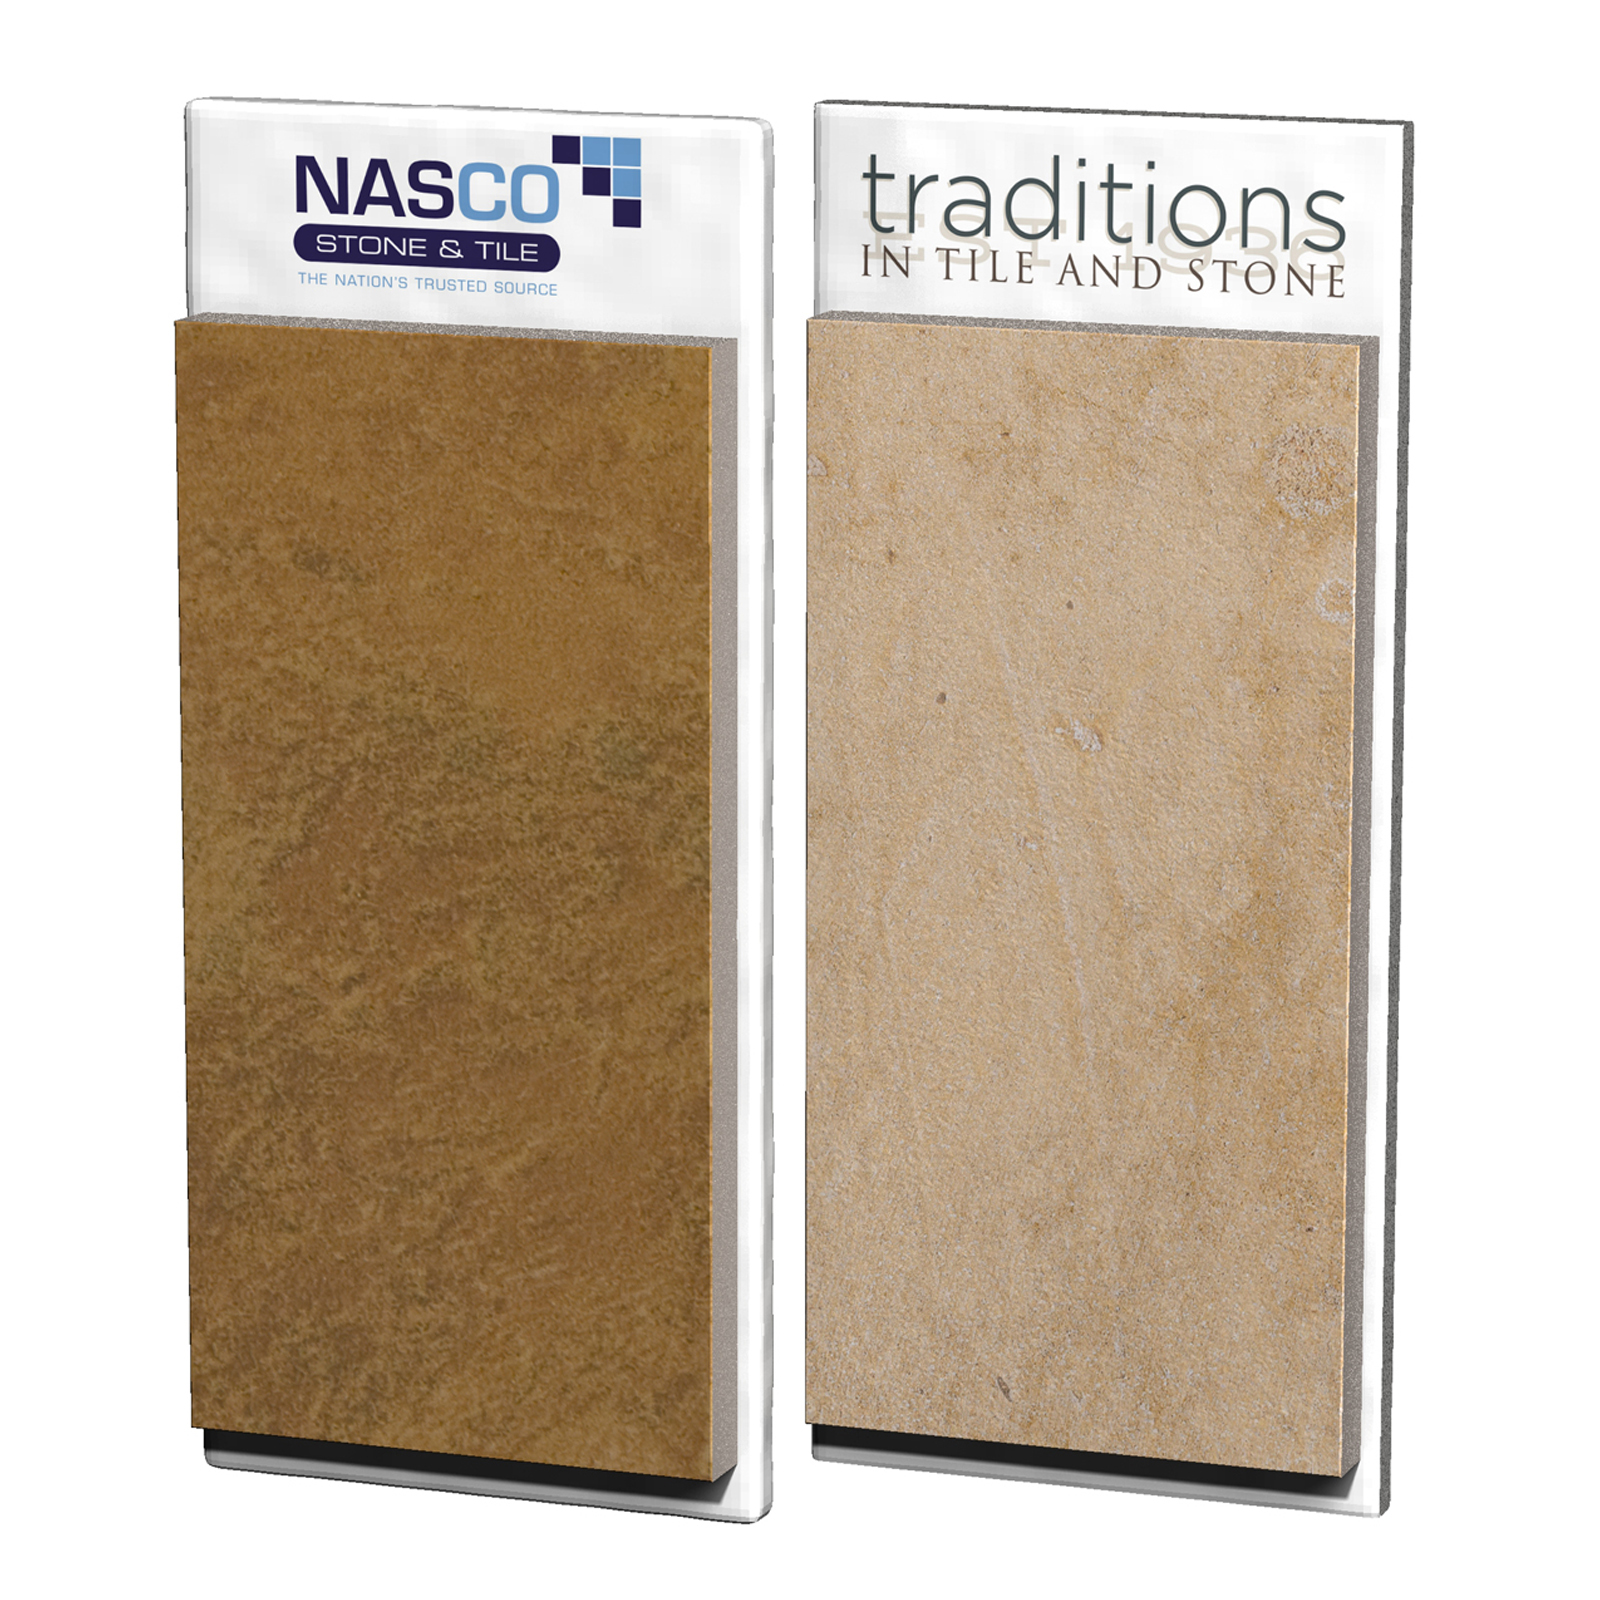 Custom Sizes and Colors Screen Print Logo or Full Color Printing Chip Board Wrapped Cardboard Easy to Order with Peg Hole Display Ceramic Tile Stone Granite Quartz Listello Deco Carpet Fabric Wallpaper Paint Finishes or Flooring